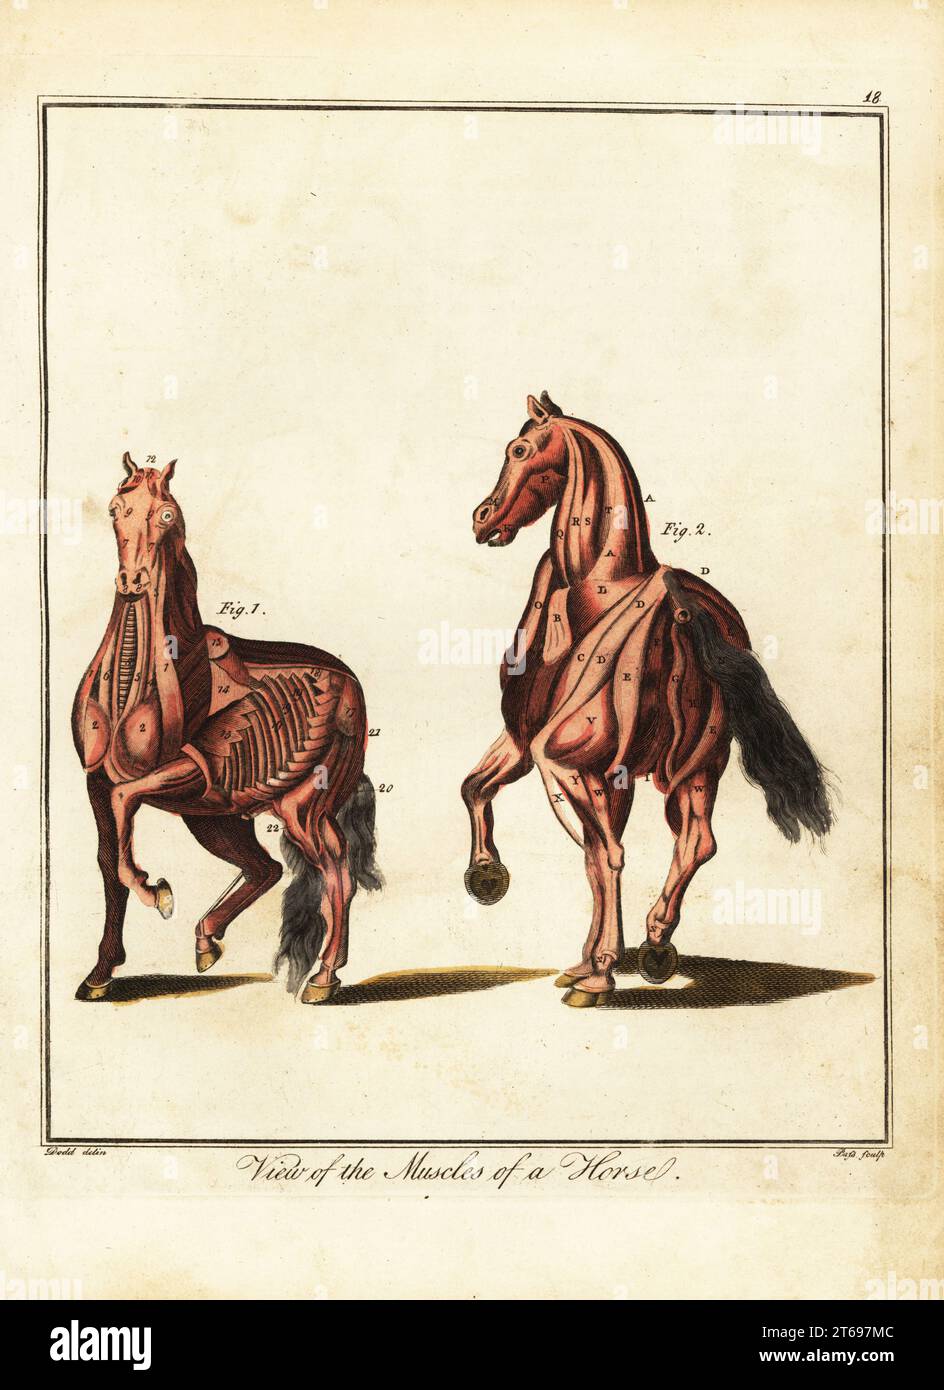 Musculature of a horse. View of the muscles of a horse. Par mastoideum, par trigeminum, par triangulare, windpipe, par longum, philtrum, cucullaris, deltoides, pectorals, serratus posticus, buttocks., etc. Handcoloured copperplate engraving by J. Pass after an illustration by Daniel Dodd from William Augustus Osbaldistons The British Sportsman, or Nobleman, Gentleman and Farmers Dictionary of Recreation and Amusement, J. Stead, London, 1792. Stock Photo